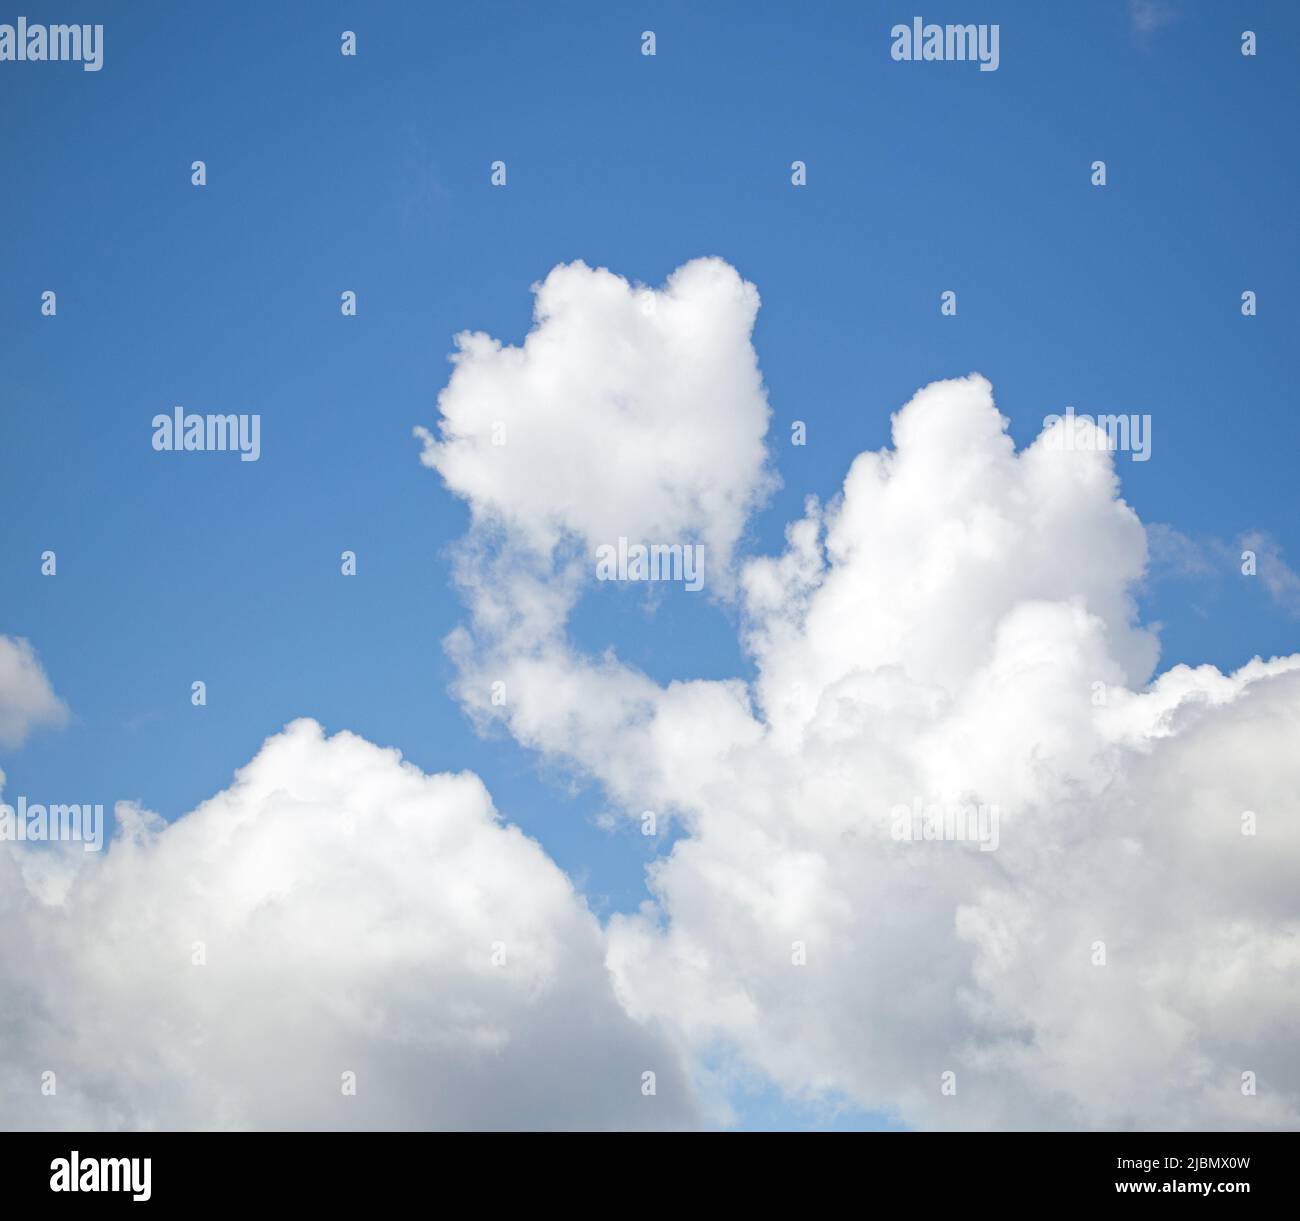 Cloudscape with deep blue sky and fluffy white clouds Stock Photo